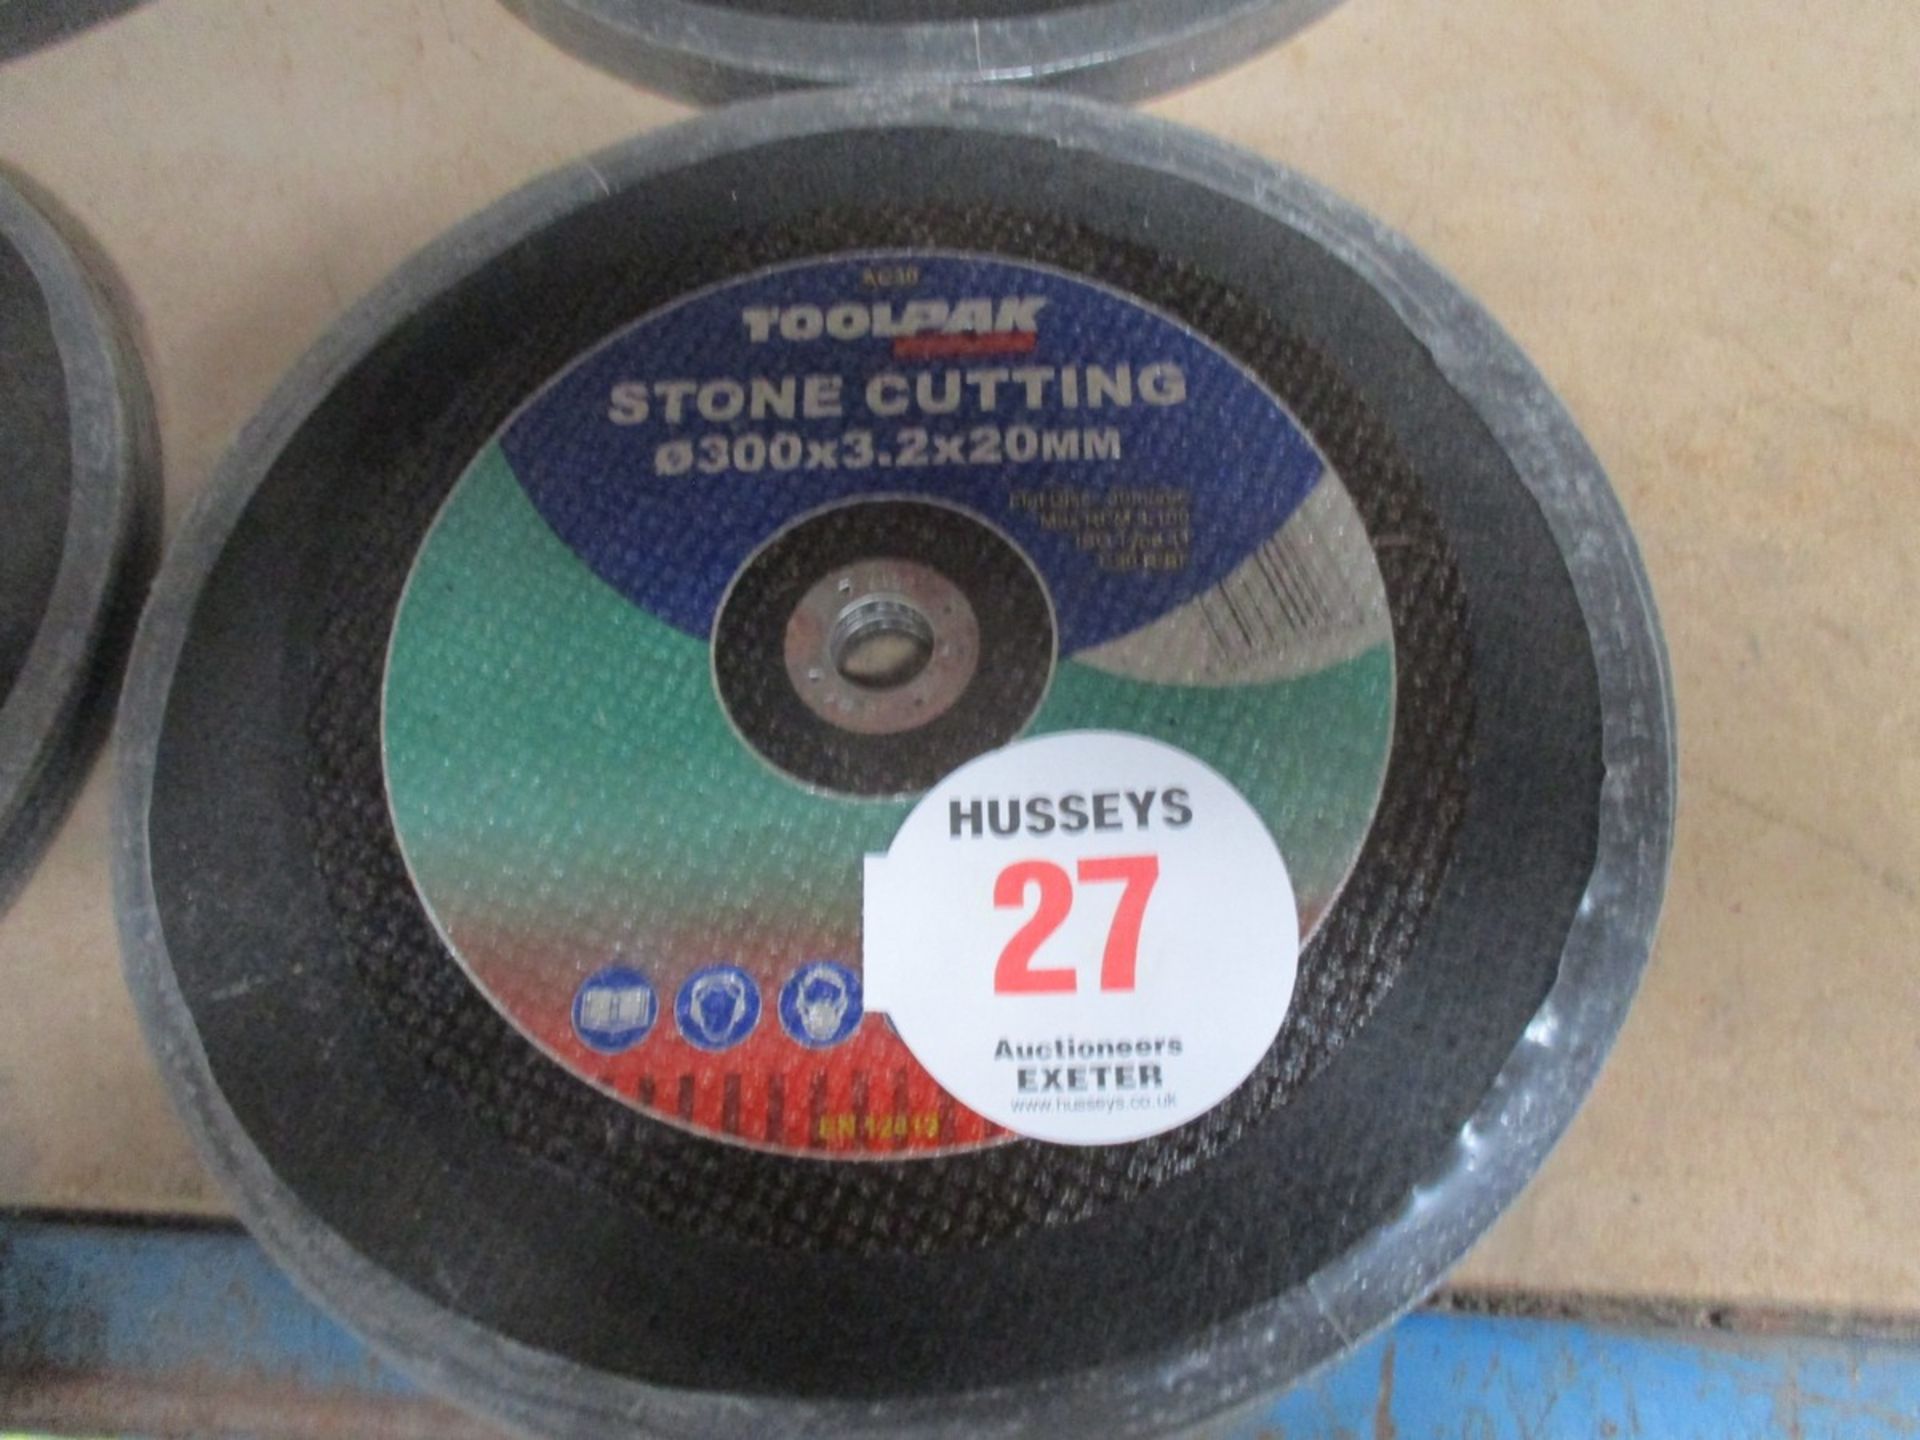 PACK OF 5 STONE GRINDING DISCS